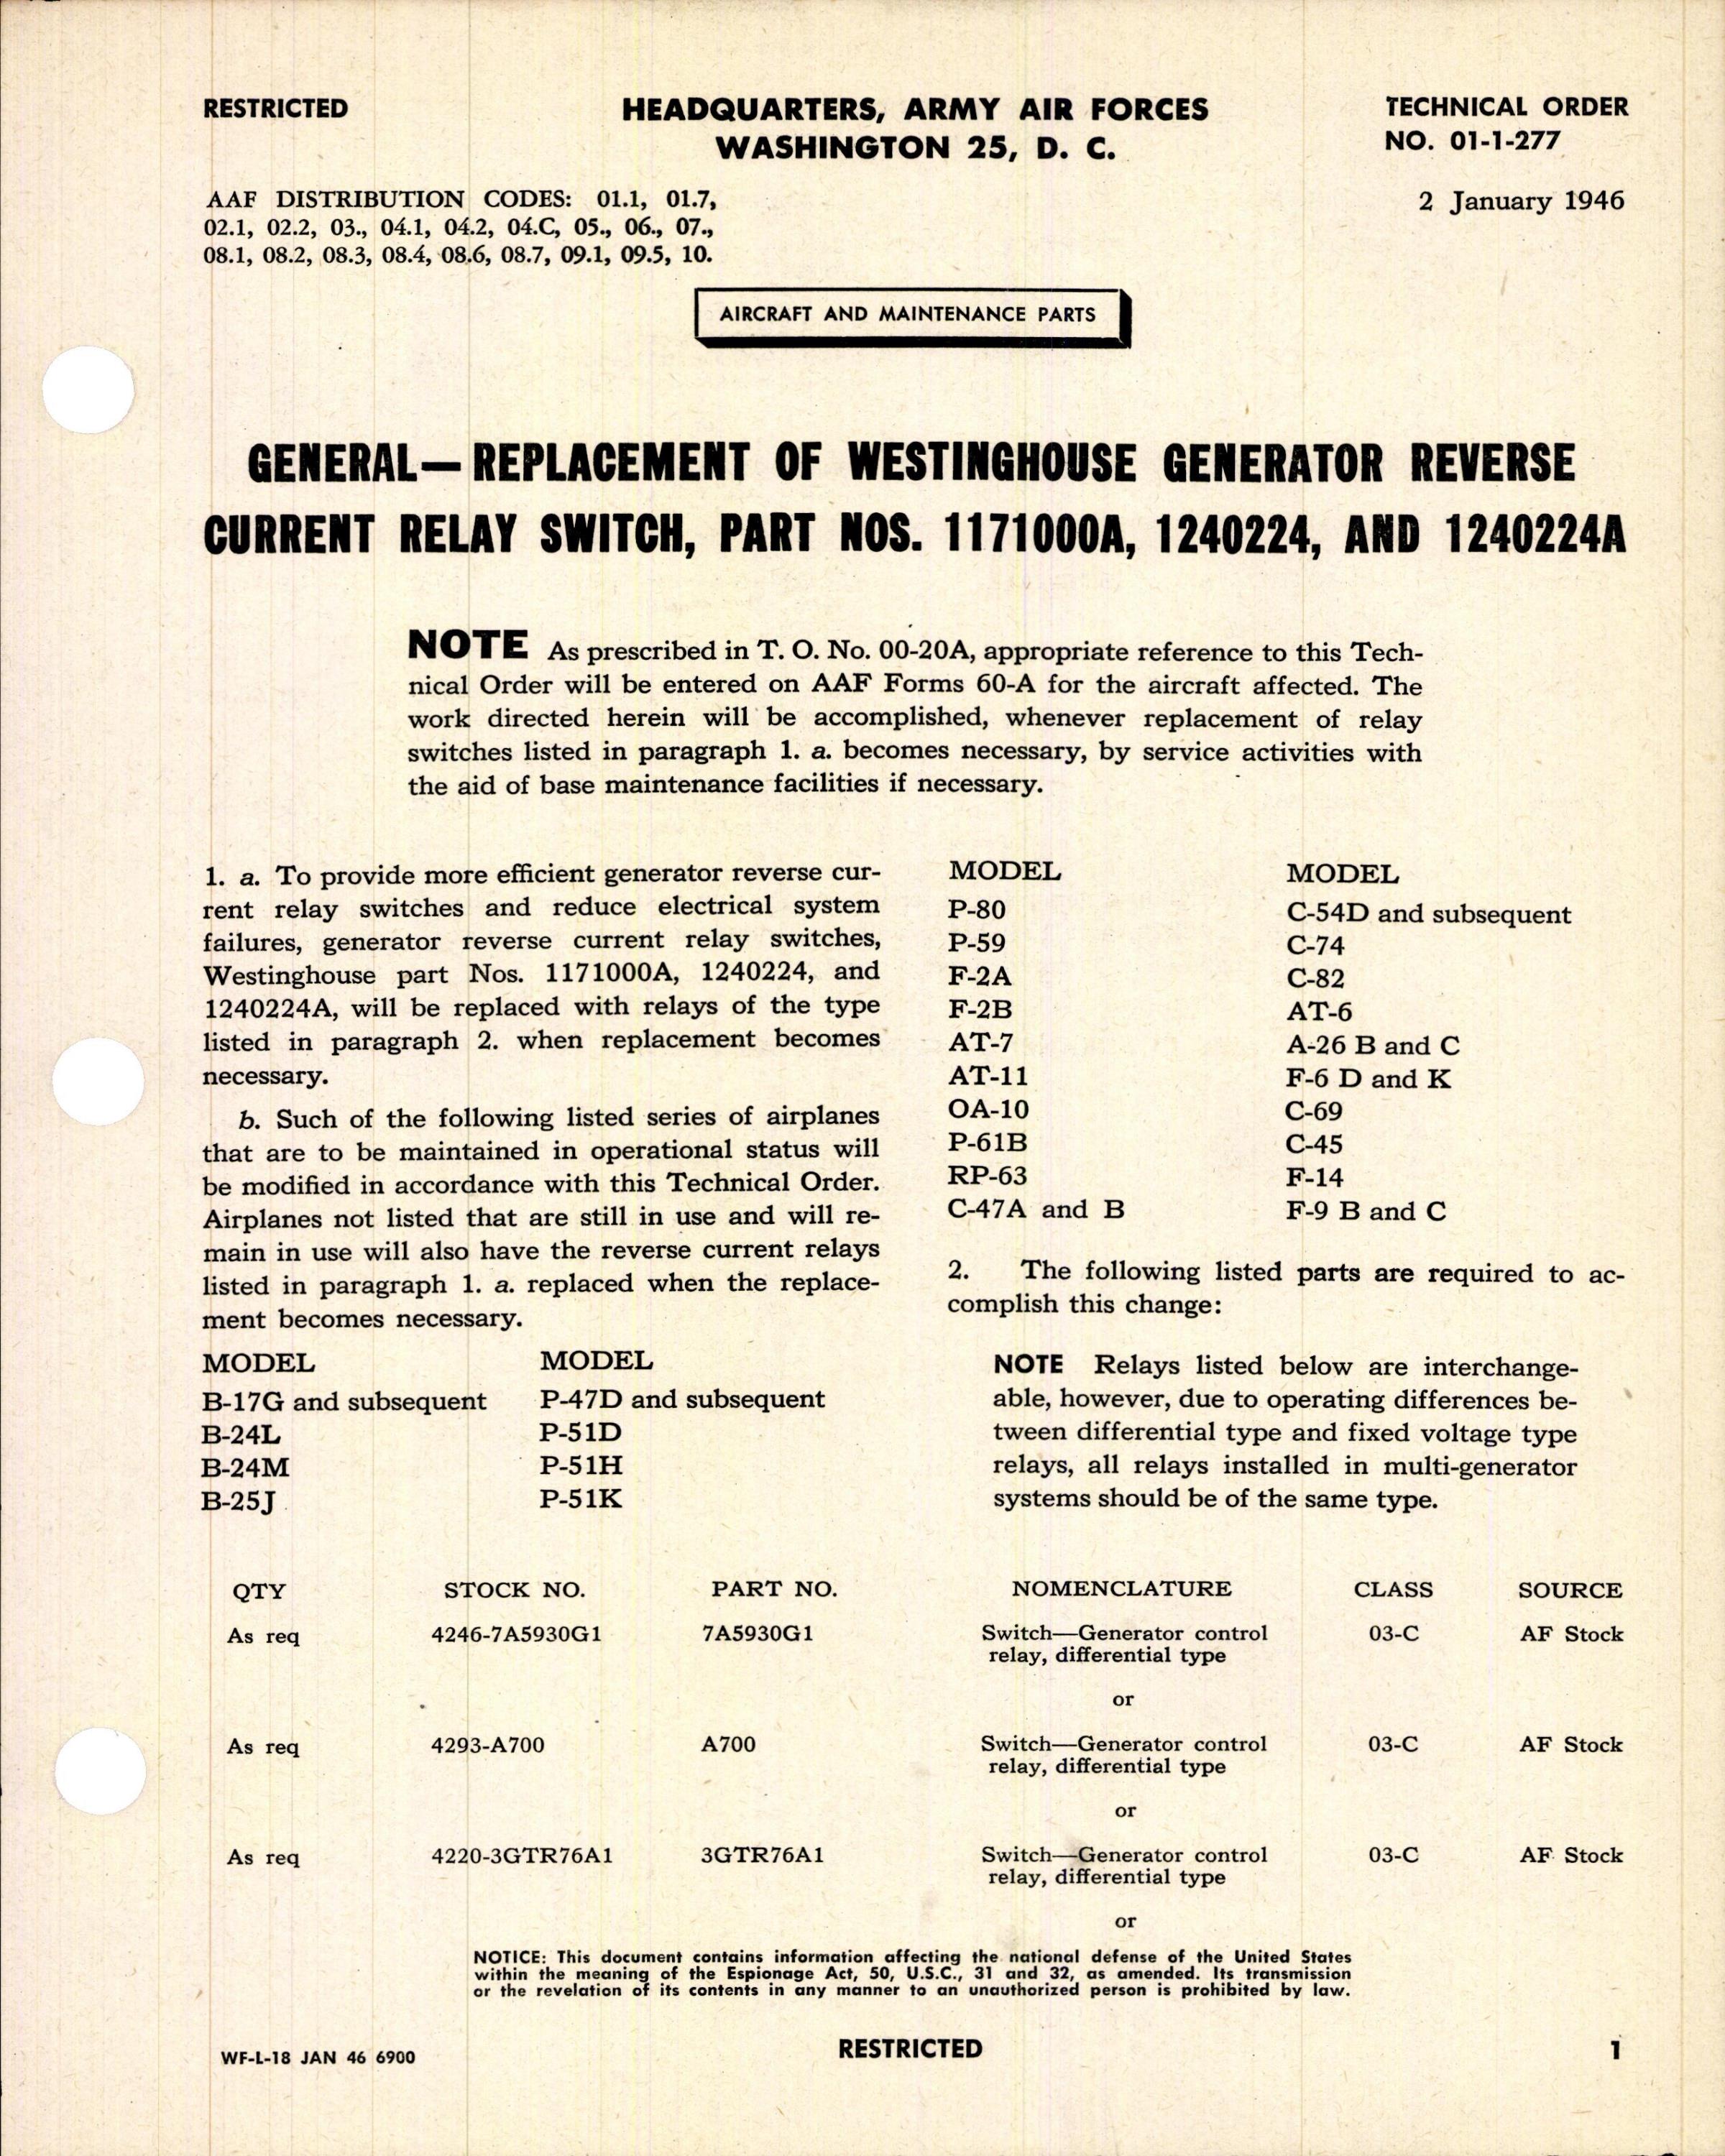 Sample page 1 from AirCorps Library document: Replacement of Generator Reverse Current Relay Switch